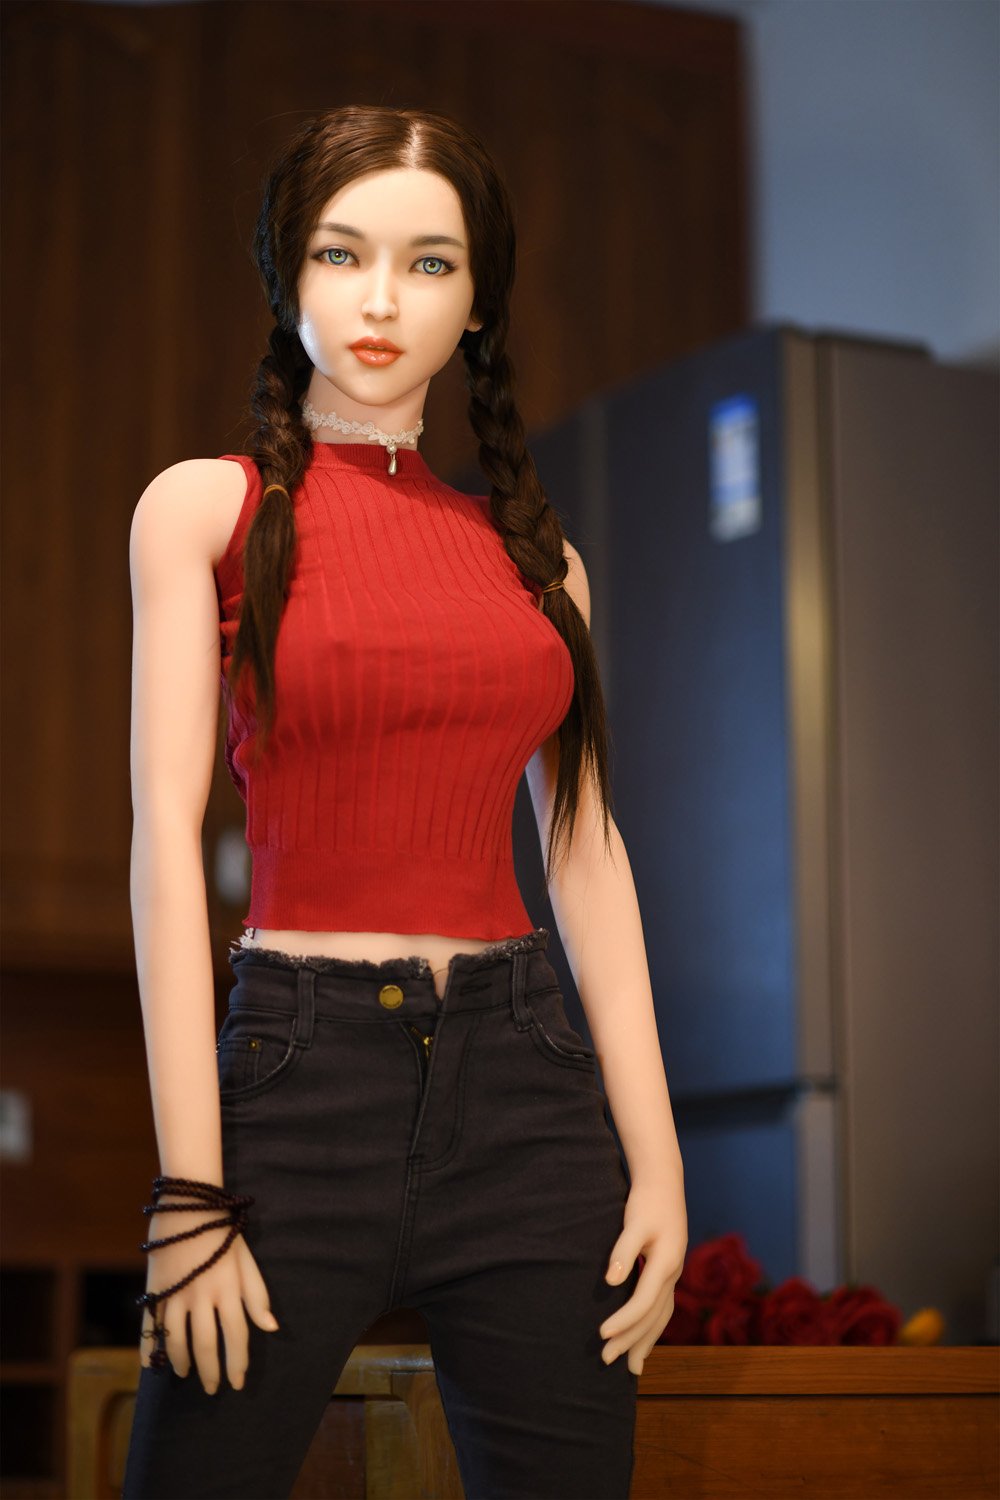 Sawyer-170CM(5.5ft) adult silicone doll for sex Sexdolls Station